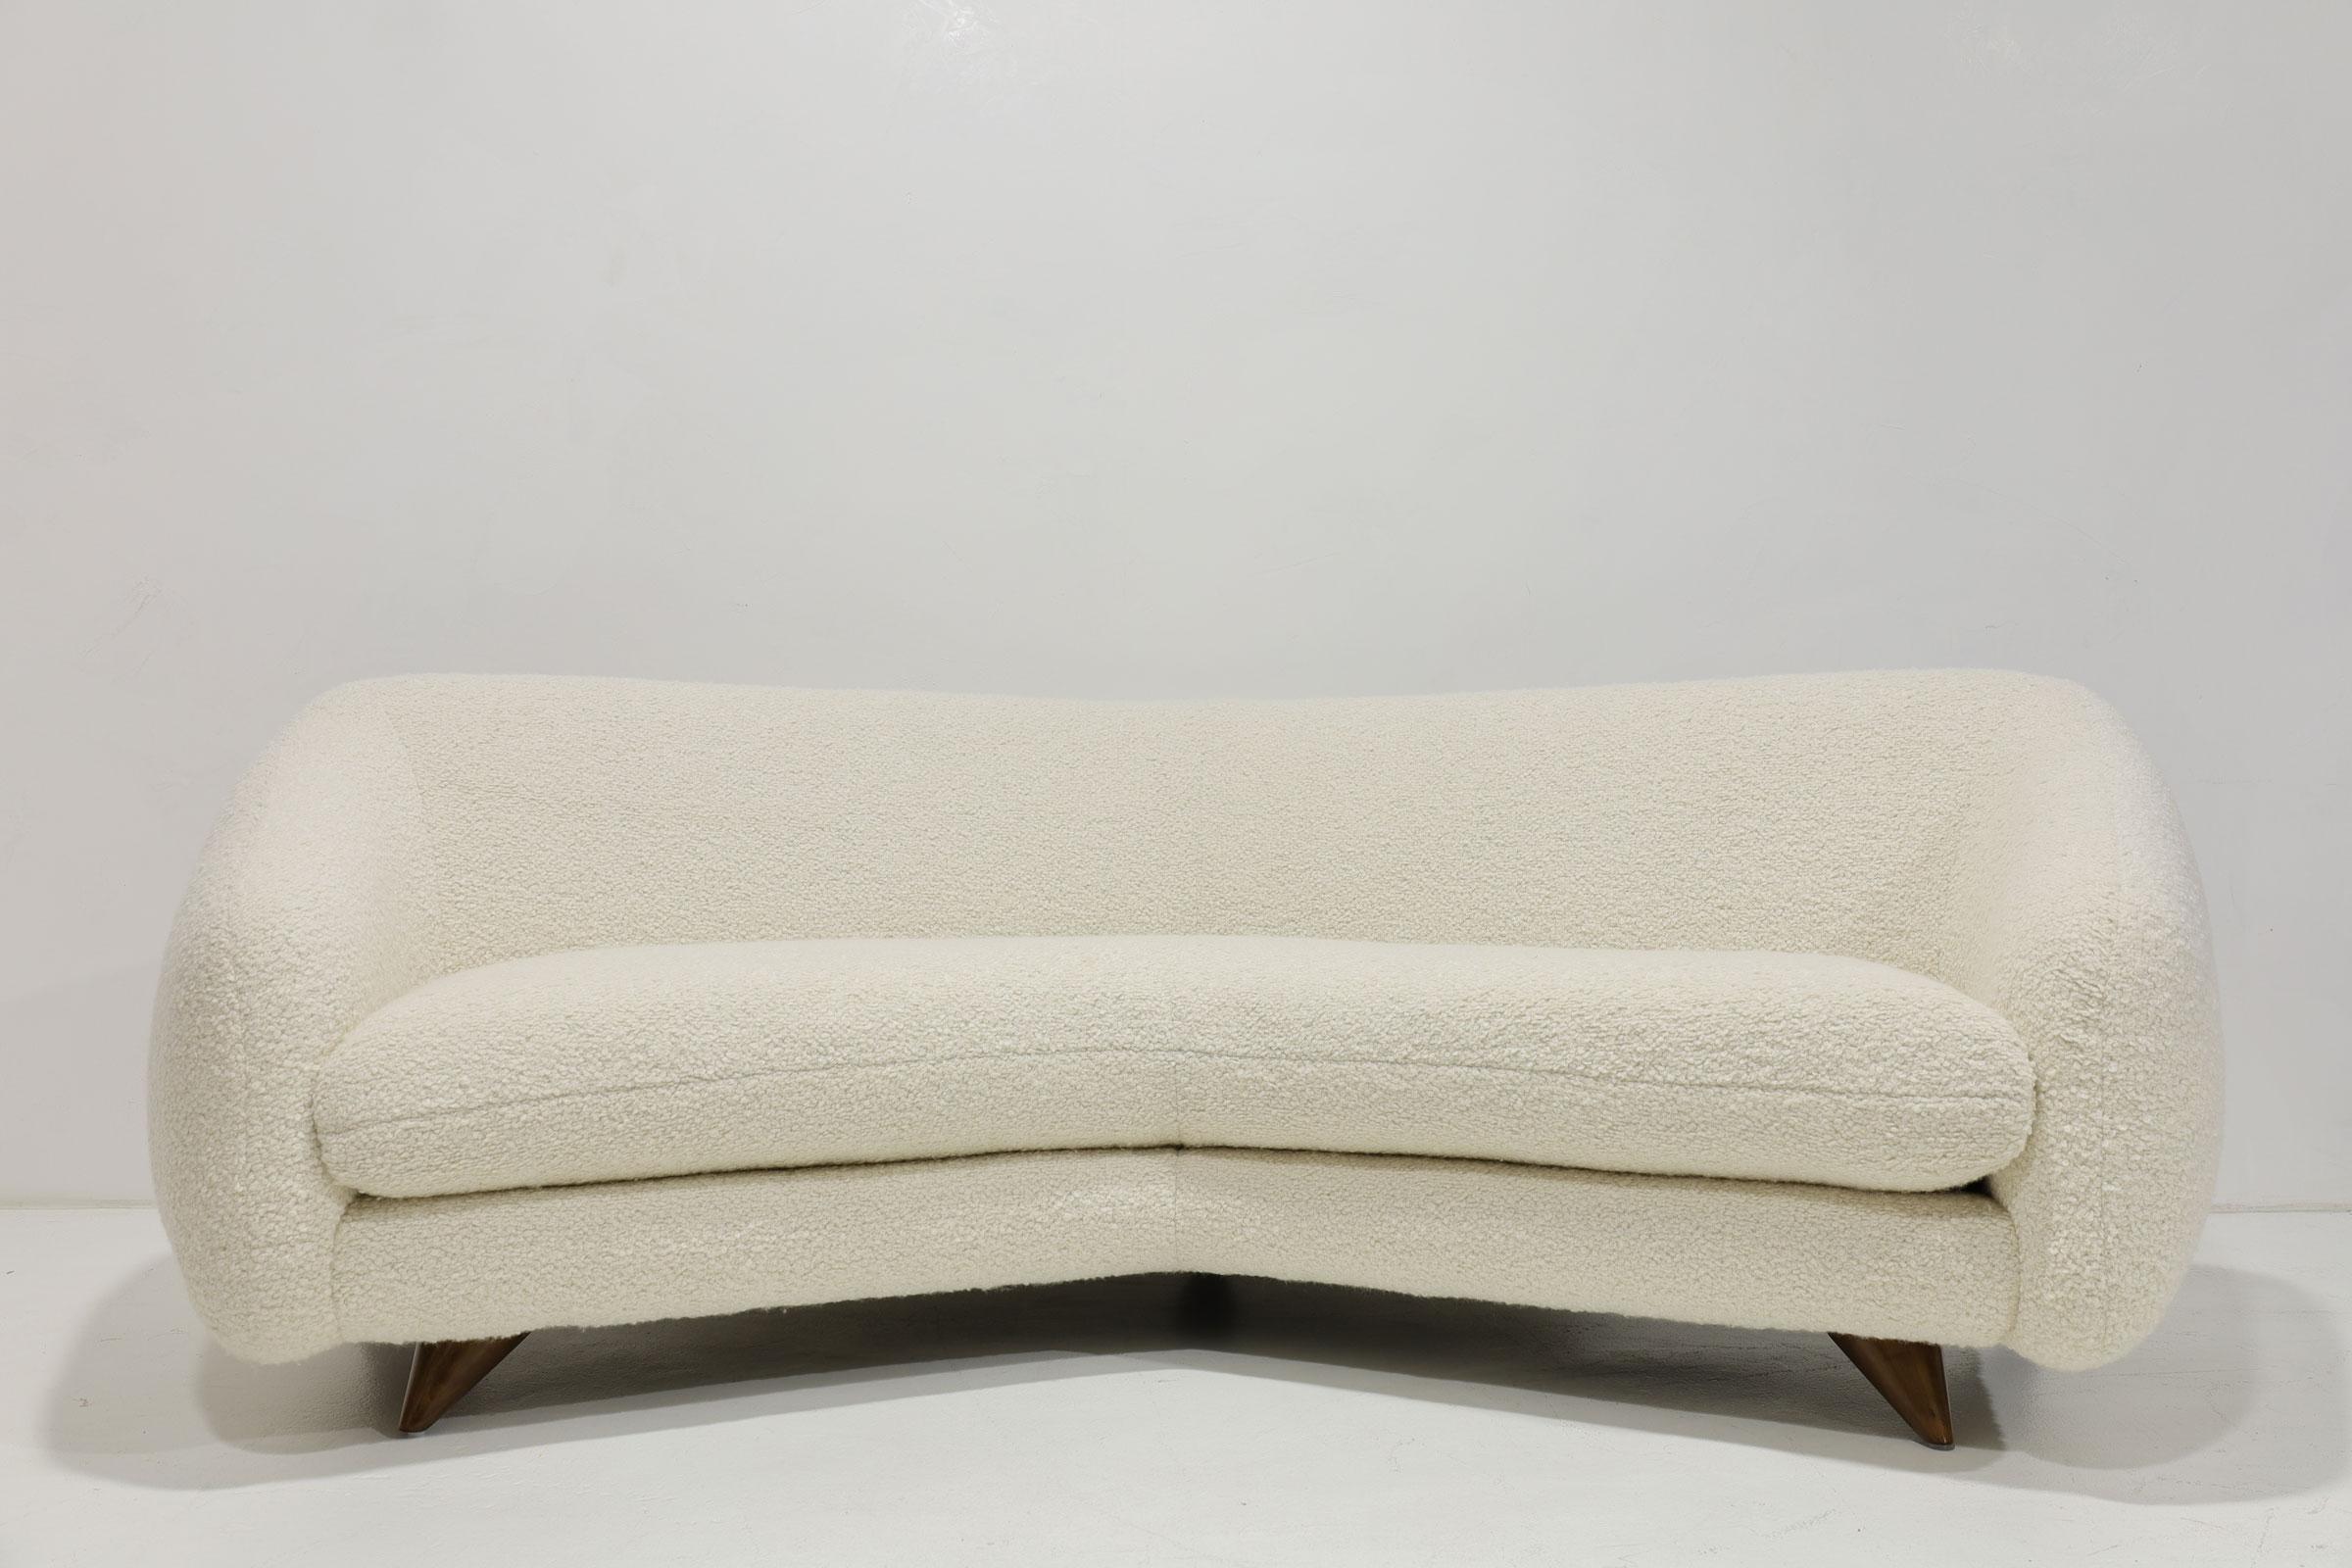 Mid-Century Modern Vladimir Kagan Wide Angle Tangent Sofa, Model 506, in Holly Hunt Teddy, 1950s For Sale